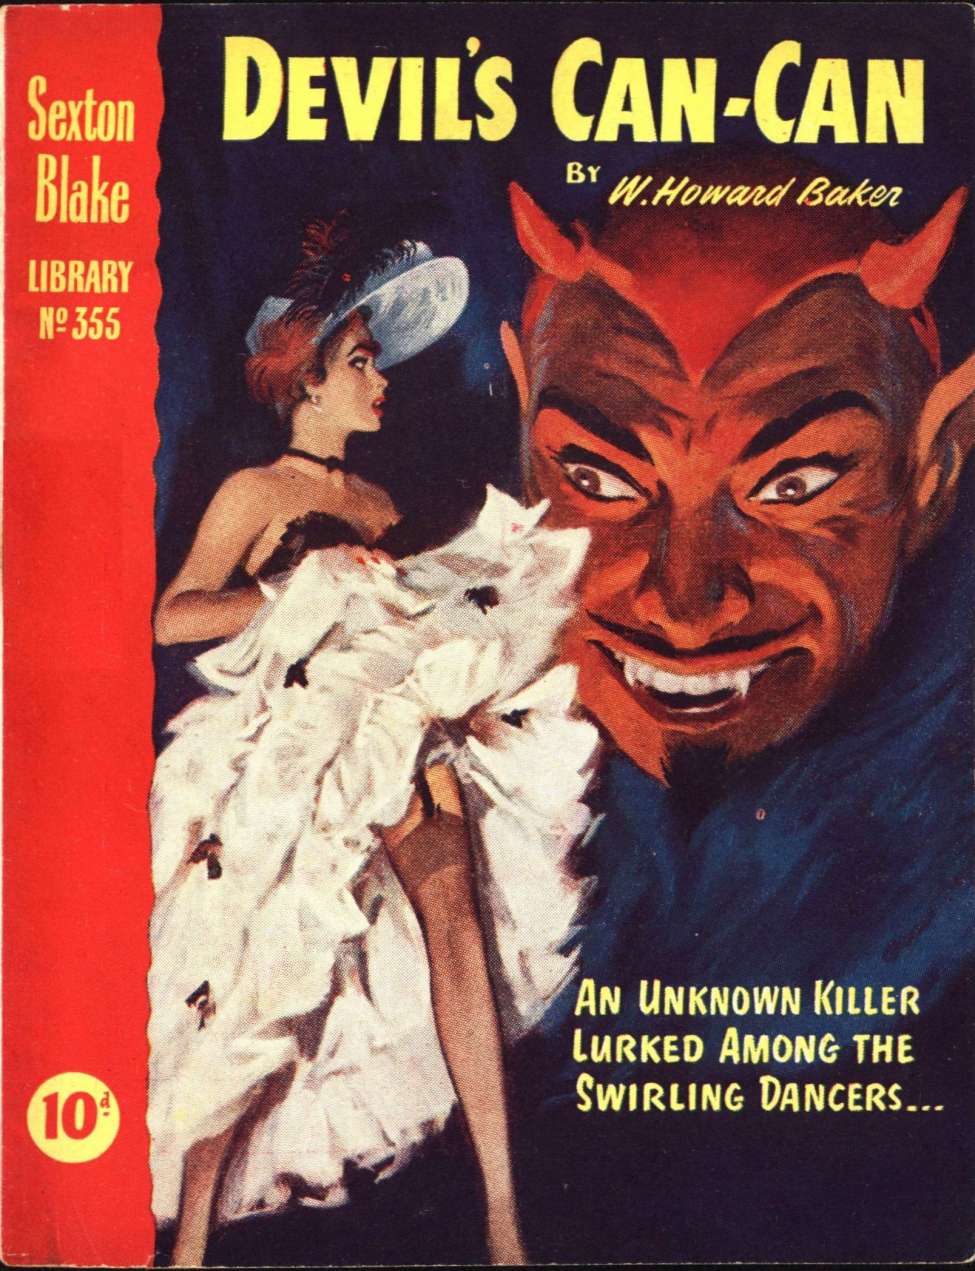 Comic Book Cover For Sexton Blake Library S3 355 - Devil's Can-Can